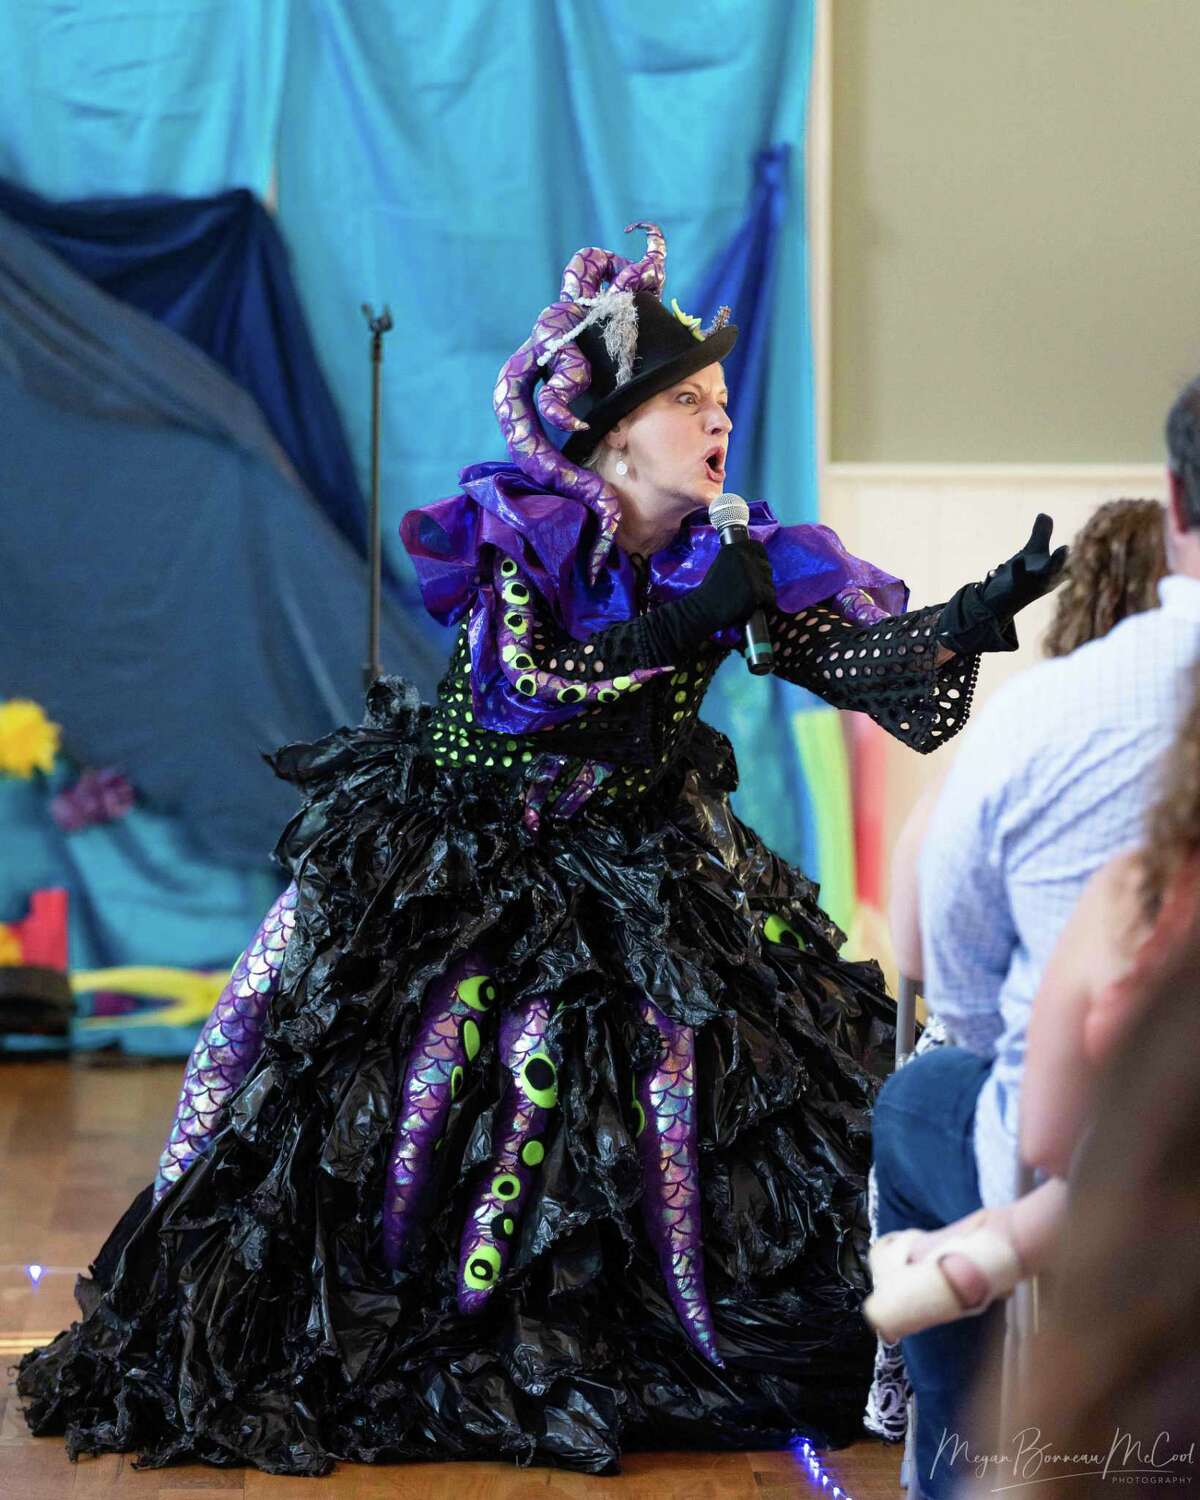 Ursula sings songs from New Paradigm Theatre Company’s production of “The Little Mermaid” at the Maritime Aquarium in Norwalk as part of a partnership between the two organizations. Her costume is made from black plastic bags.